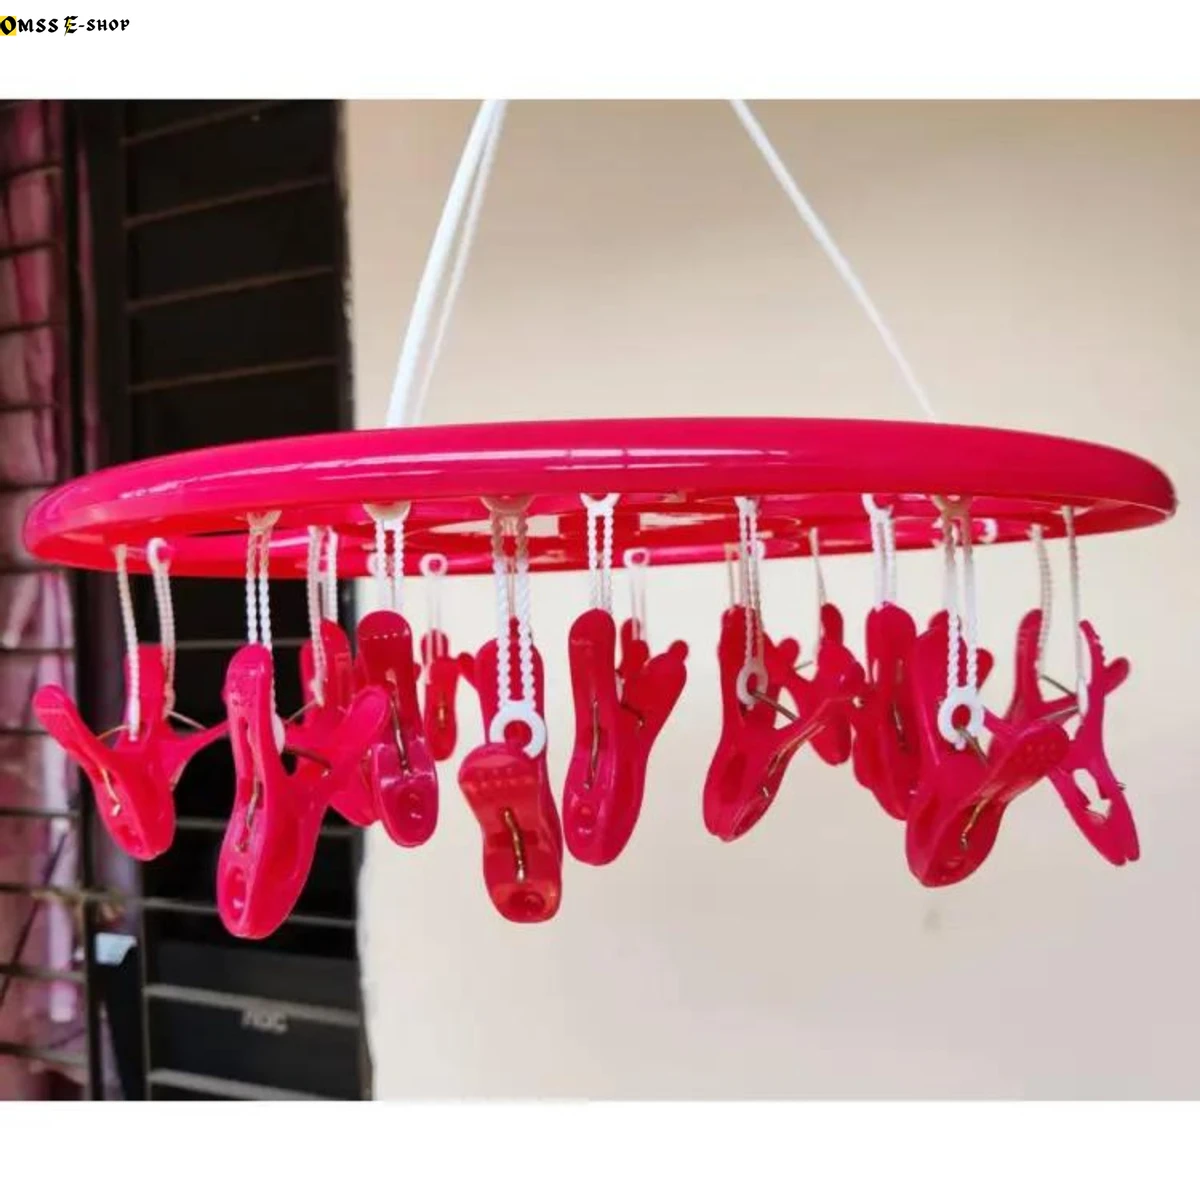 Plastic Hanging Cloth Drying Stand Hanger with 18 Clips/pegs, Baby Clothes Hanger Stand, Round Shape Hanger